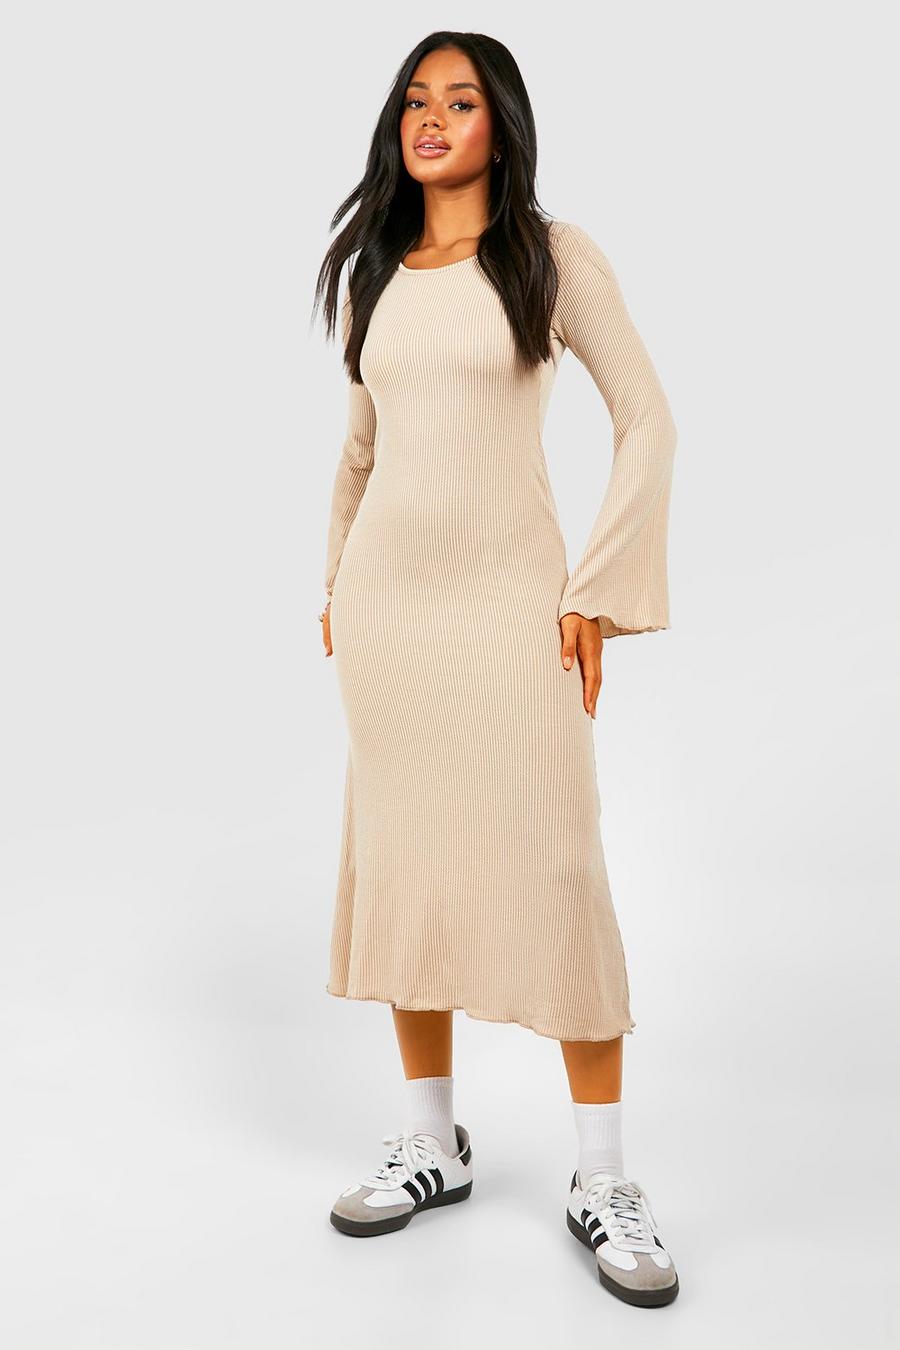 Stone Washed Rib Fit And Flare Midaxi Dress